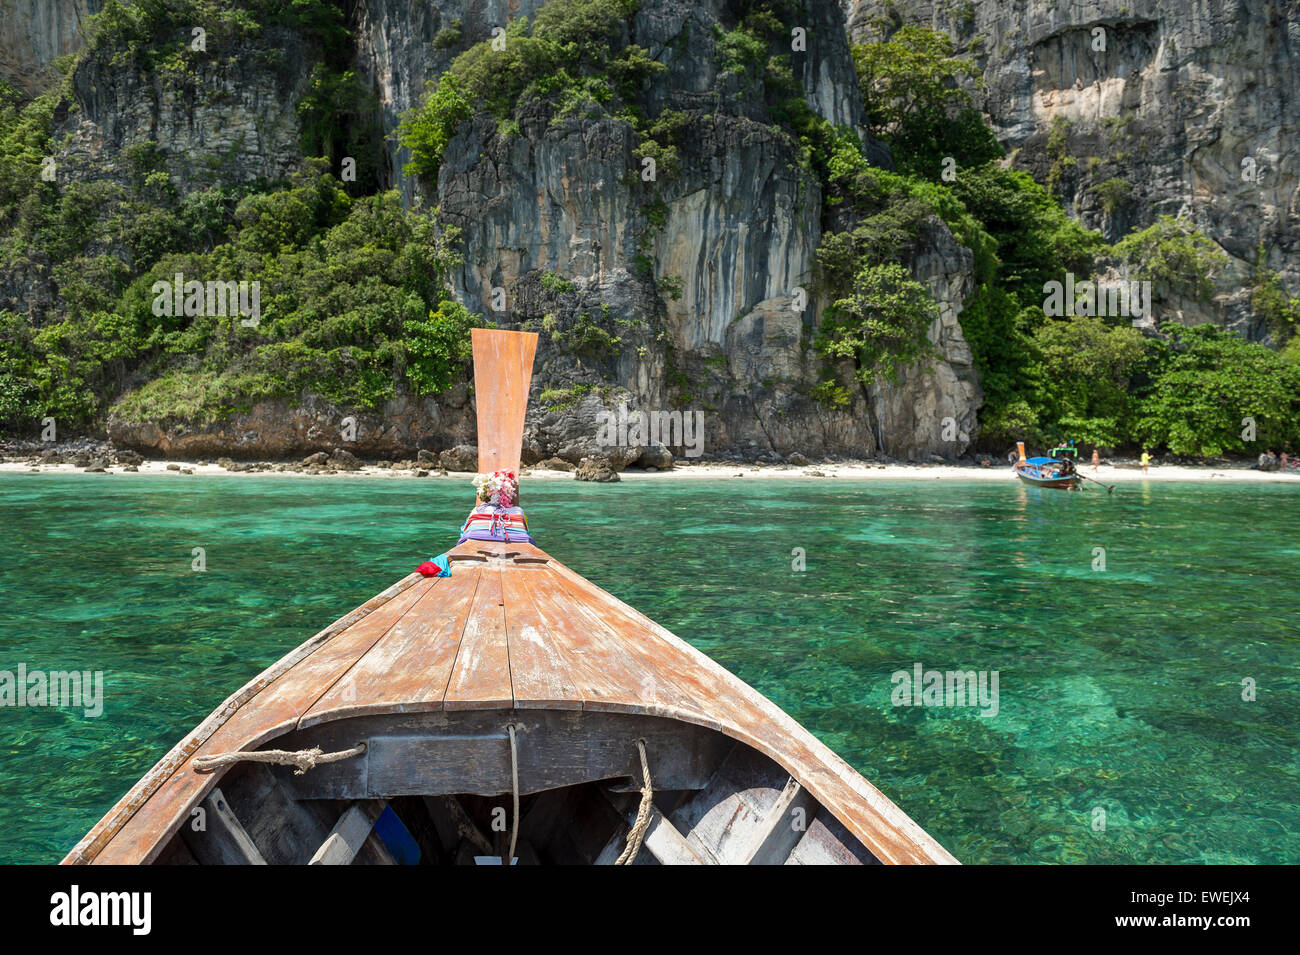 Dramatic karst mountain geology stands above the bow of a longtail boat on a day trip to Mosquito Island Krabi Thailand Stock Photo